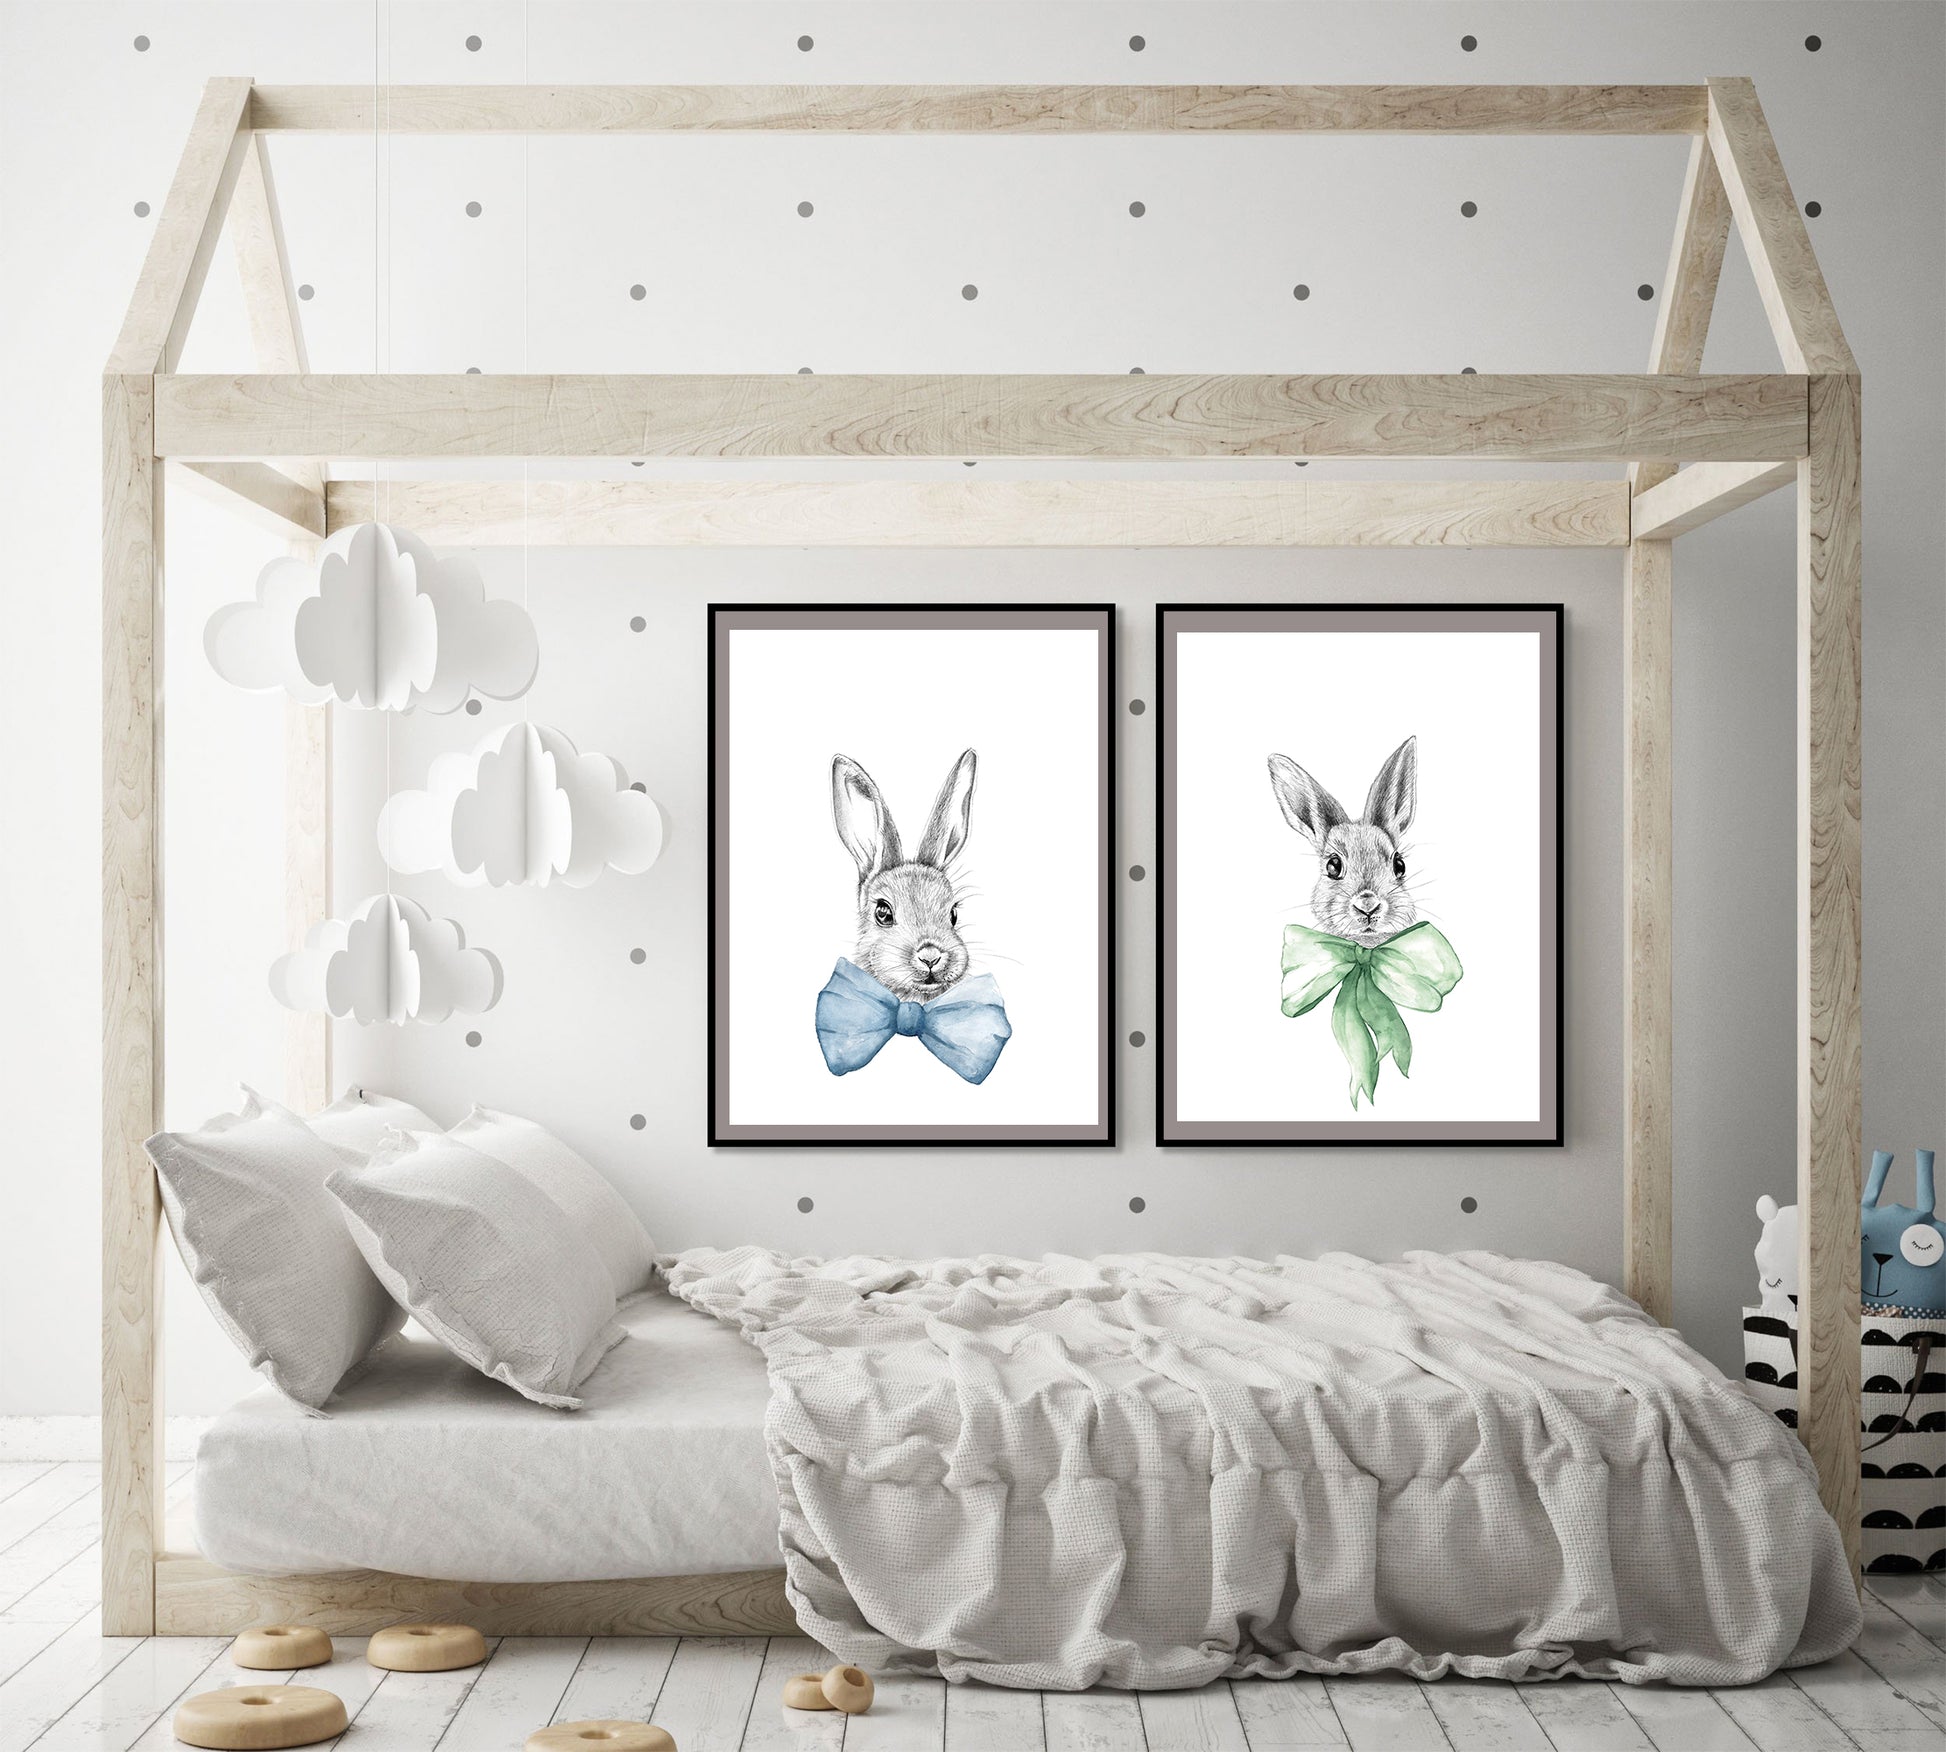 Bunnies in bows set of 2 prints